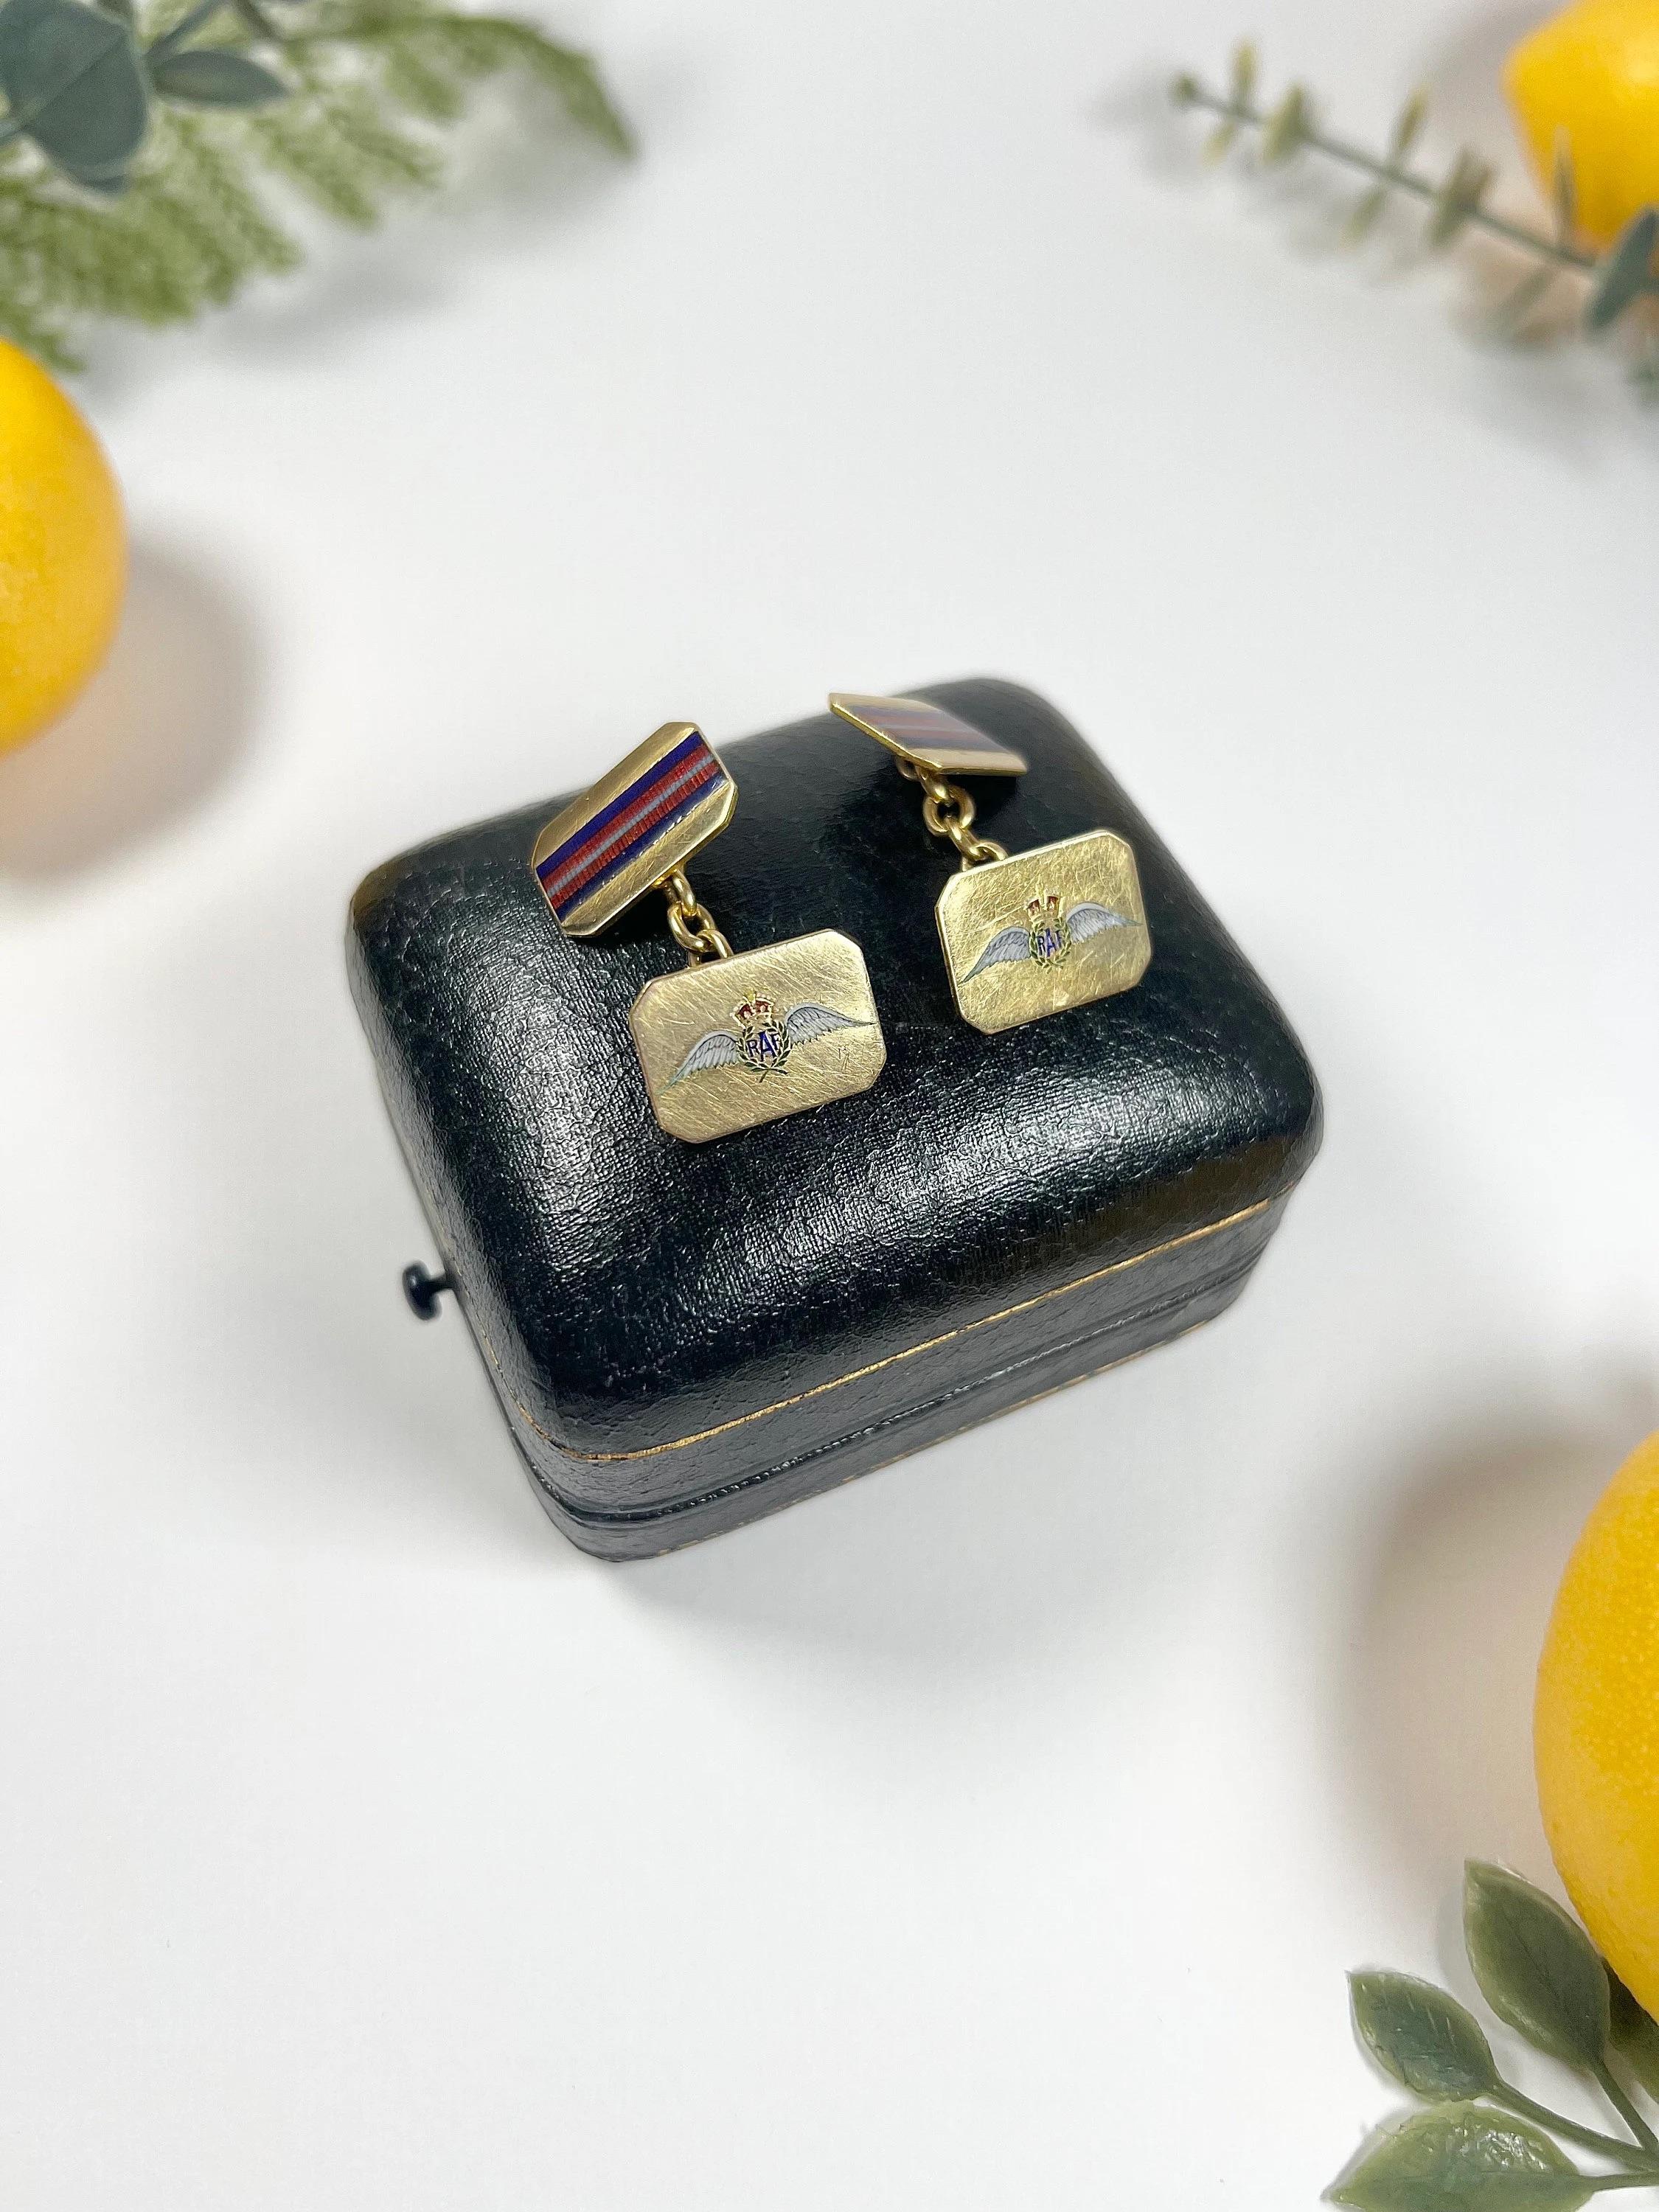 Antique Cufflinks 

18ct Gold Stamped 

Circa 1910

Fabulous, Royal Air Force rectangular shaped cufflinks. Beautifully decorated with the RAF emblem & RAF coloured enamel. In great condition for their age, would make a lovey gift! 

Measure approx